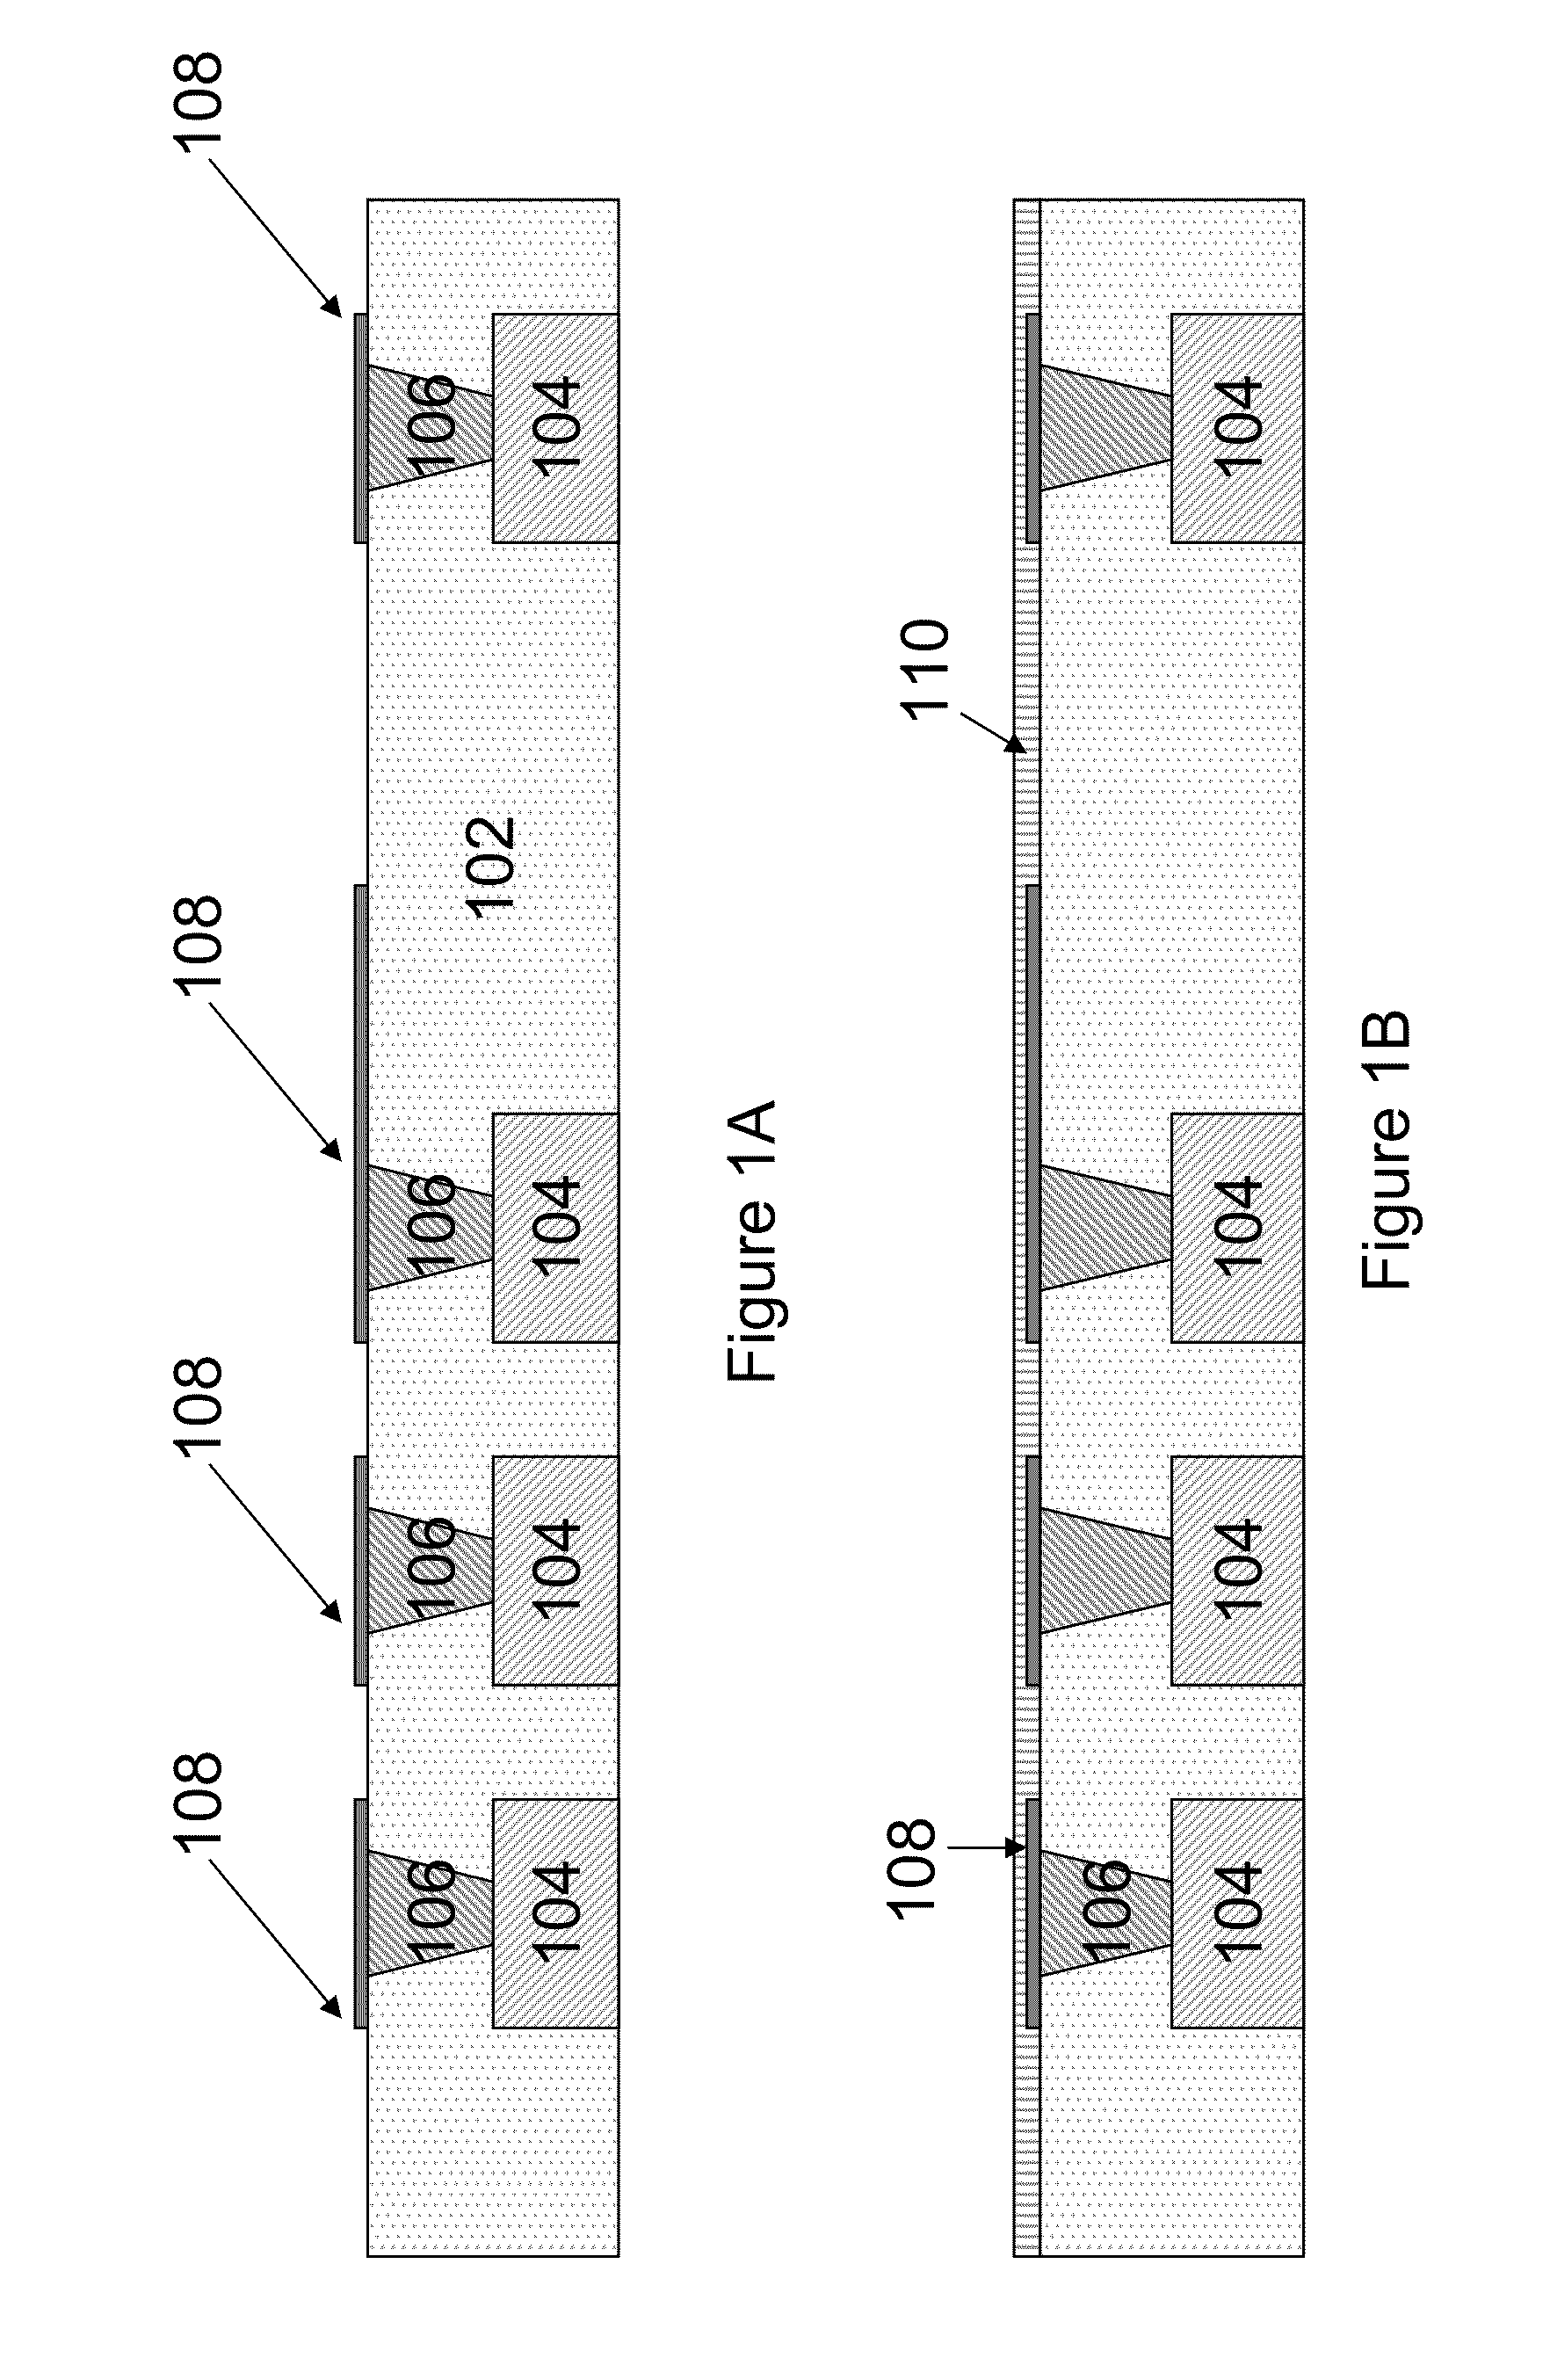 Device containing plurality of smaller MEMS devices in place of a larger MEMS device